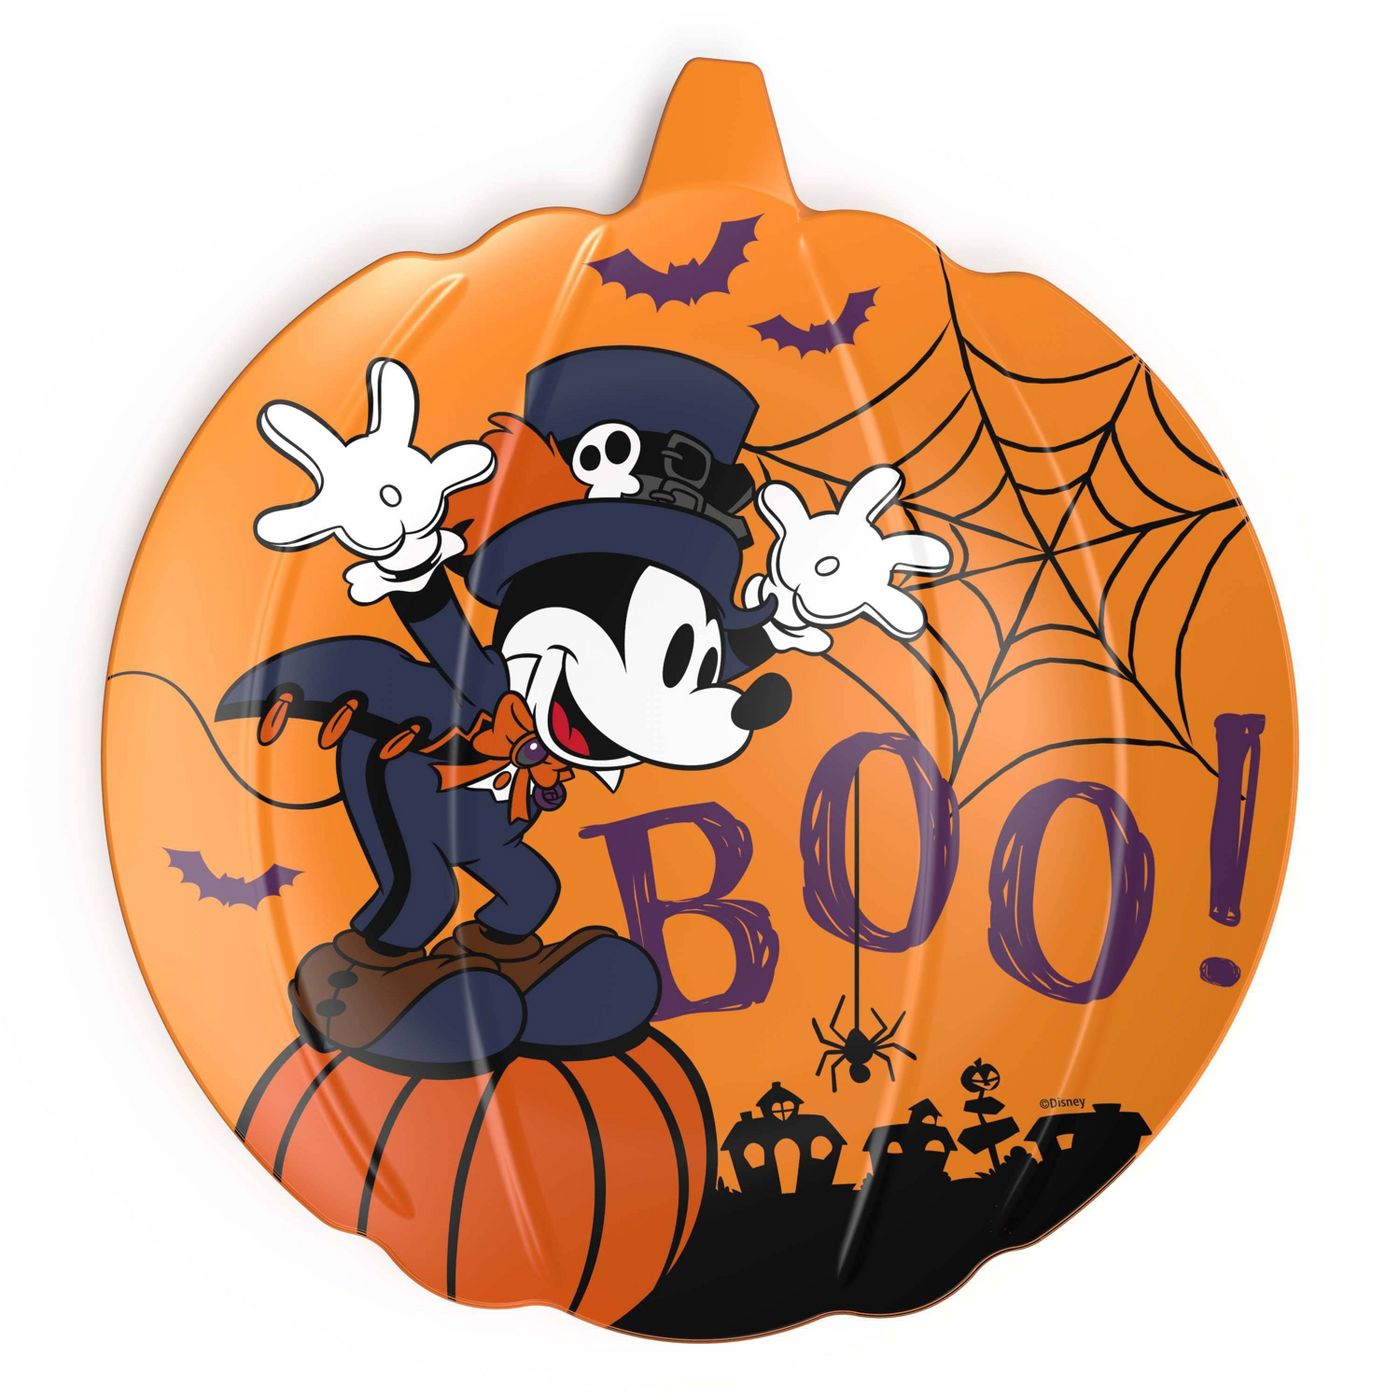 This 8" Halloween Mickey plate set is getting ready to hit the shelves at the low price of $3.00